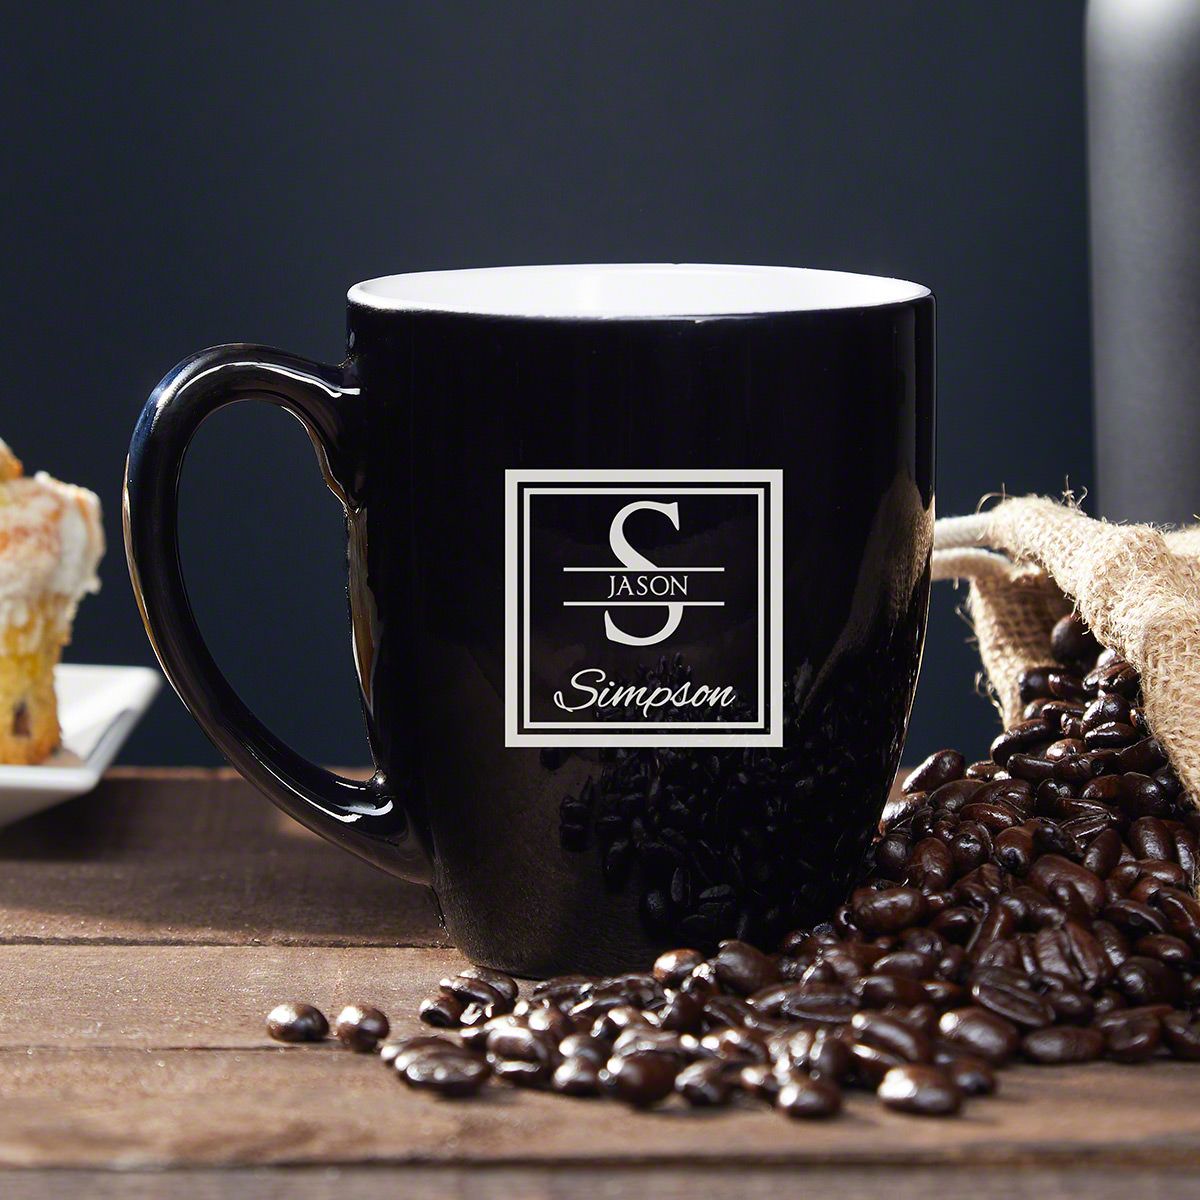 Personalized Coffee Mug With Name and the Logo of Name Printed With High-quality Inks and Technology